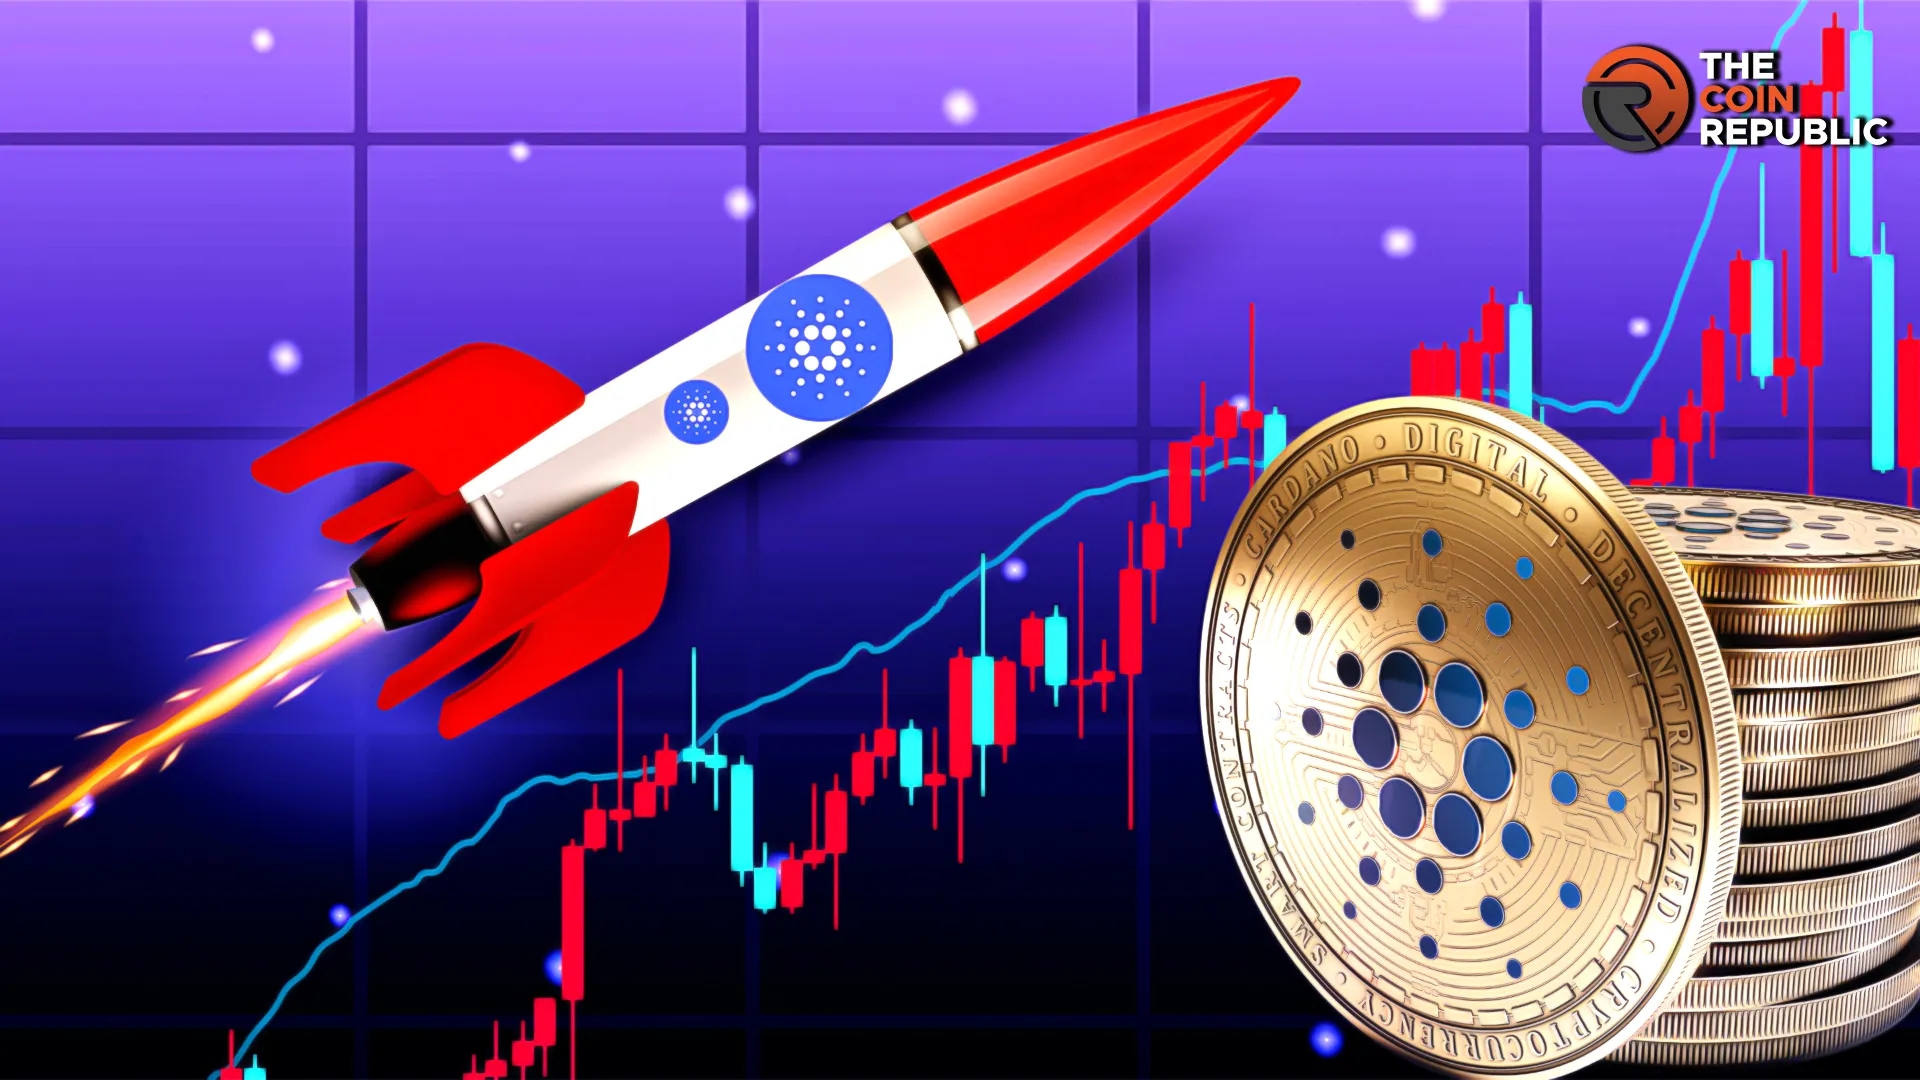 Cardano Price Prediction: Is ADA Poised For a Pullback Toward $1?